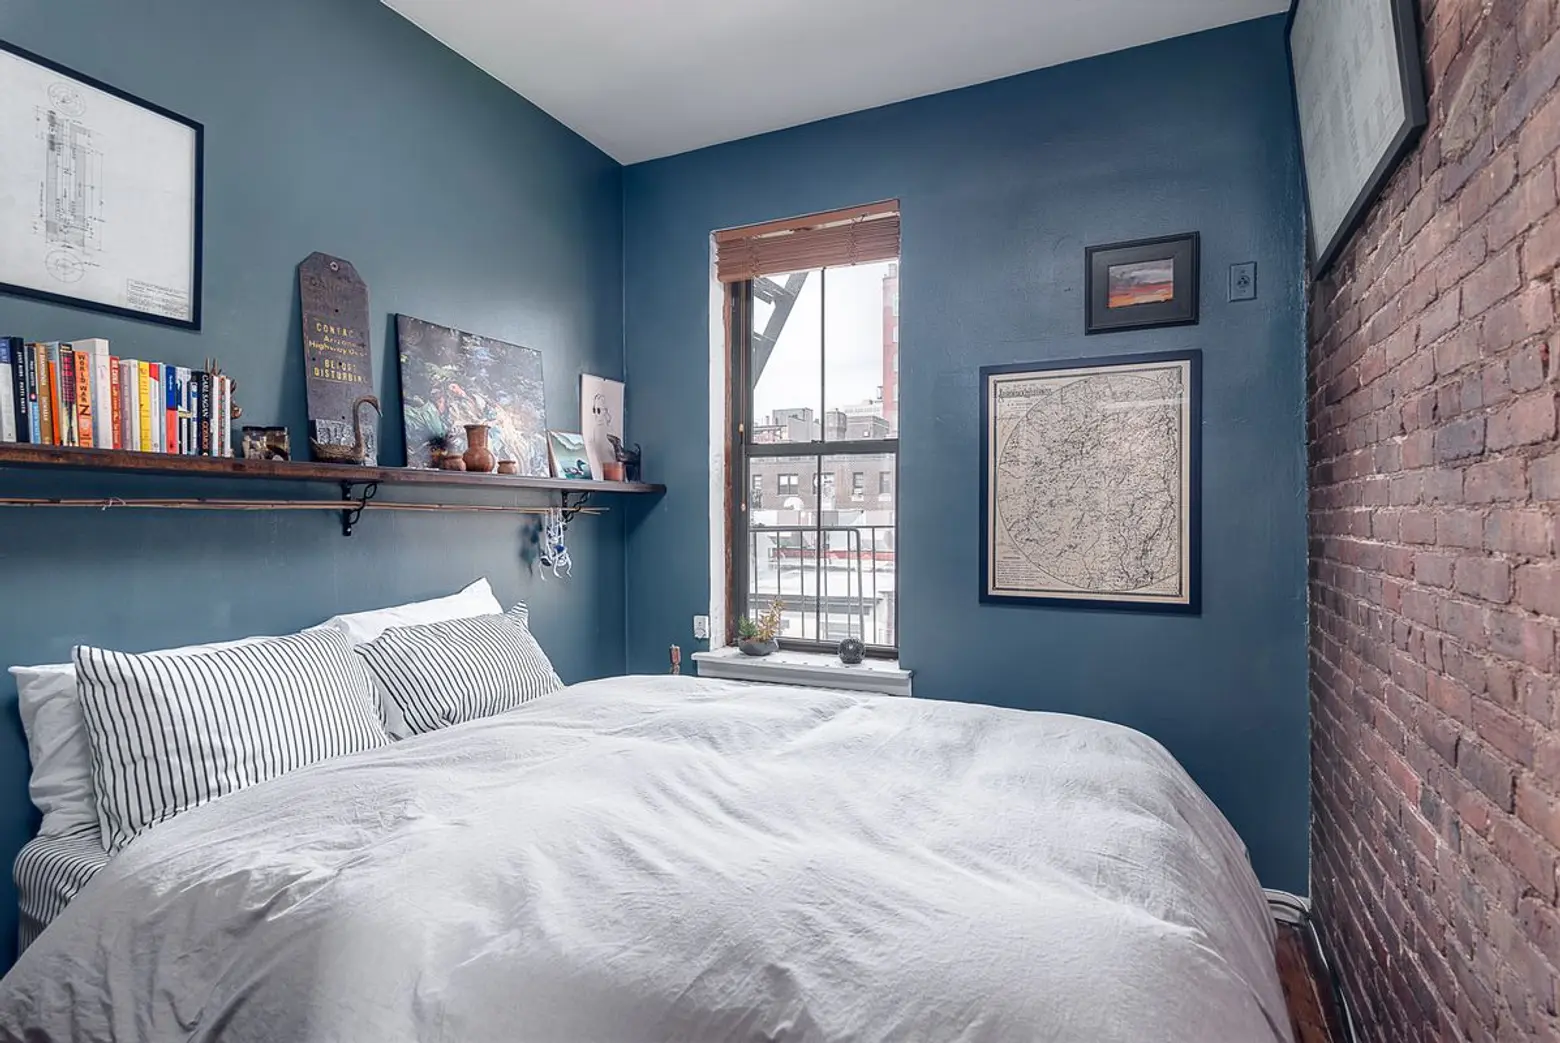 221 West 21st Street, Chelsea, Cool Listings, Homepolish, small space design, tiny apartments, co-ops, interiors